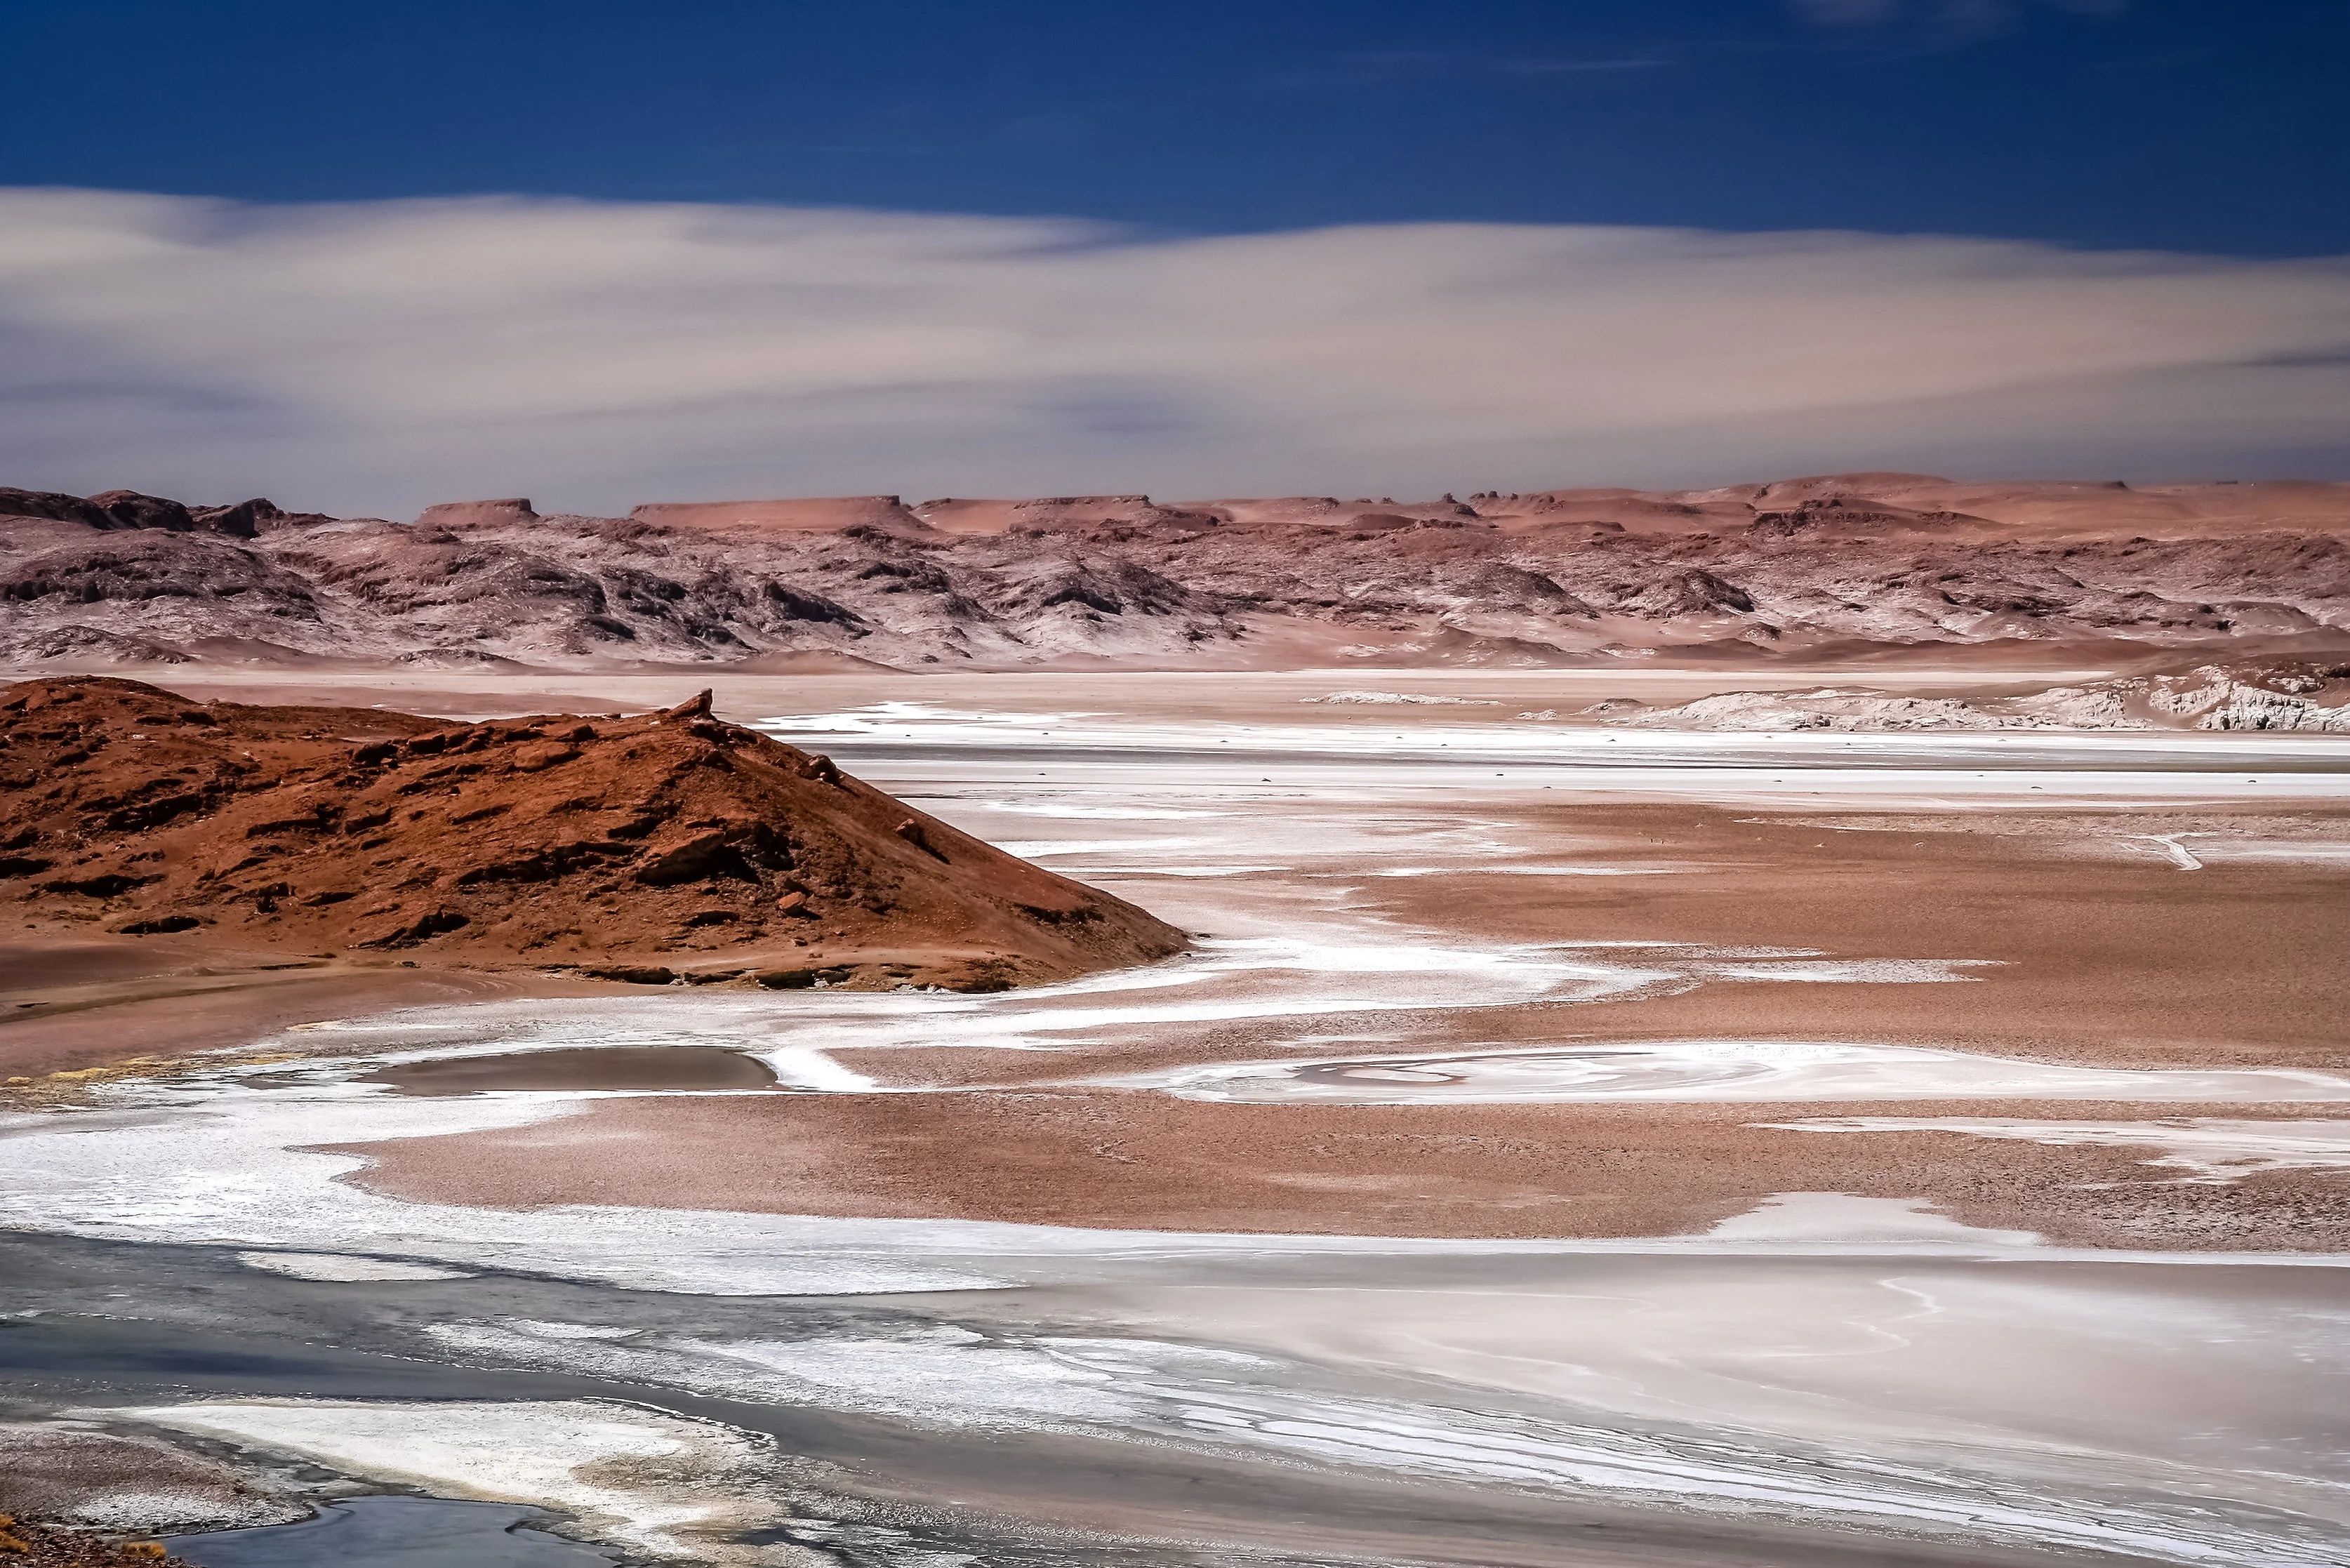 Atacama Desert is one of the must sees in Chile - here's why